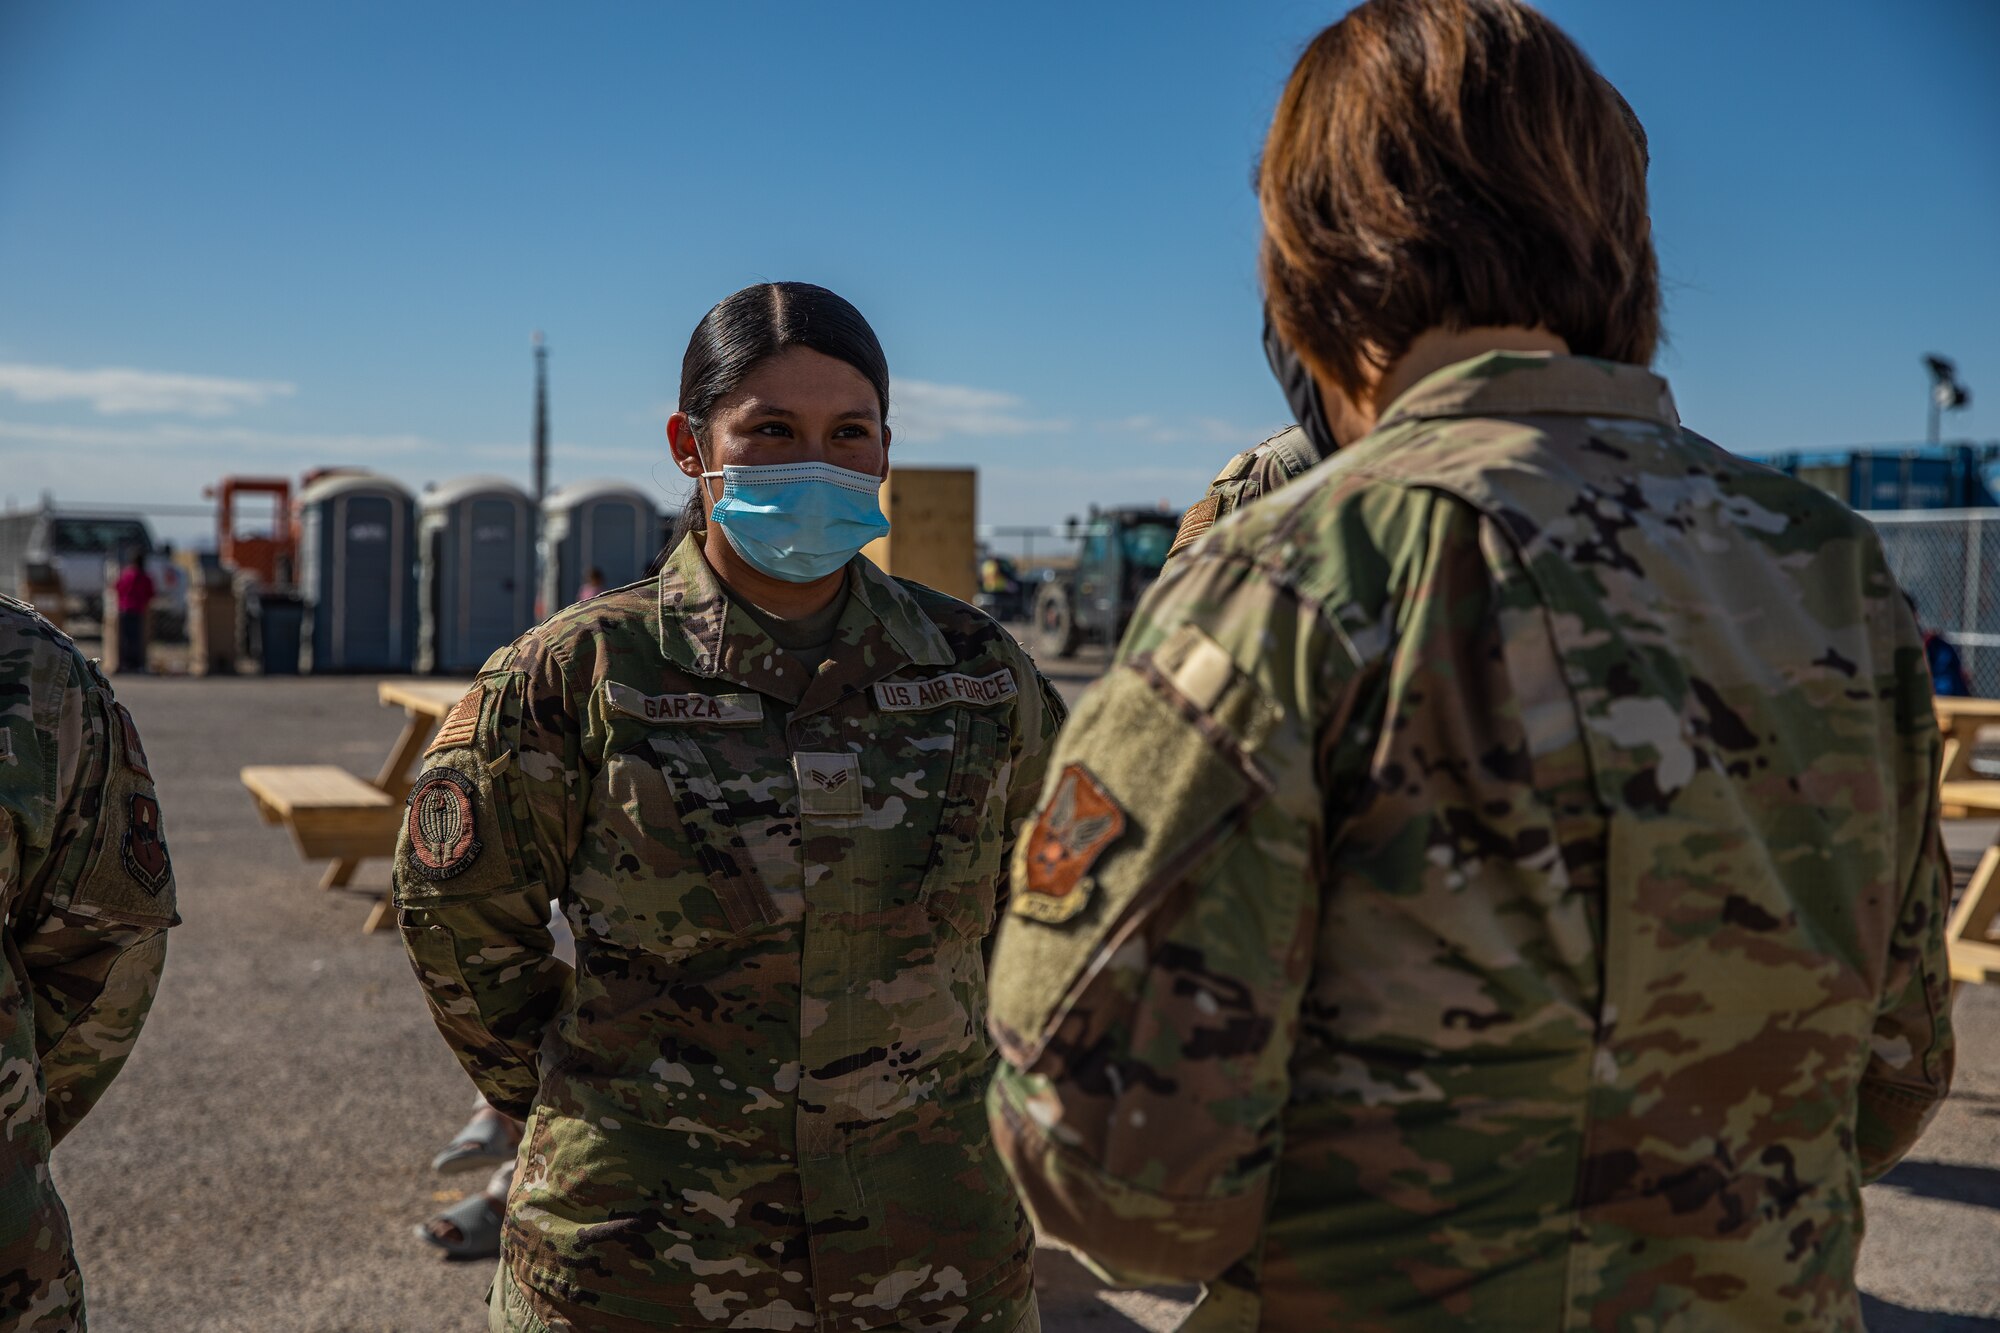 Chief Master Sgt. of the Air Force JoAnne S. Bass presents a coin to Senior Airman Leslie Garza, Task Force-Holloman personnel support for contingency operations deployed from Randolph Air Force Base, Texas, on Holloman AFB, New Mexico, Oct. 13, 2021. The Department of Defense, through U.S. Northern Command, and in support of the Department of Homeland Security, is providing transportation, temporary housing, medical screening, and general support for at least 50,000 Afghan evacuees at suitable facilities, in permanent or temporary structures, as quickly as possible. This initiative provides Afghan personnel essential support at secure locations outside Afghanistan. (U.S. Army photo by Pfc. Anthony Sanchez)